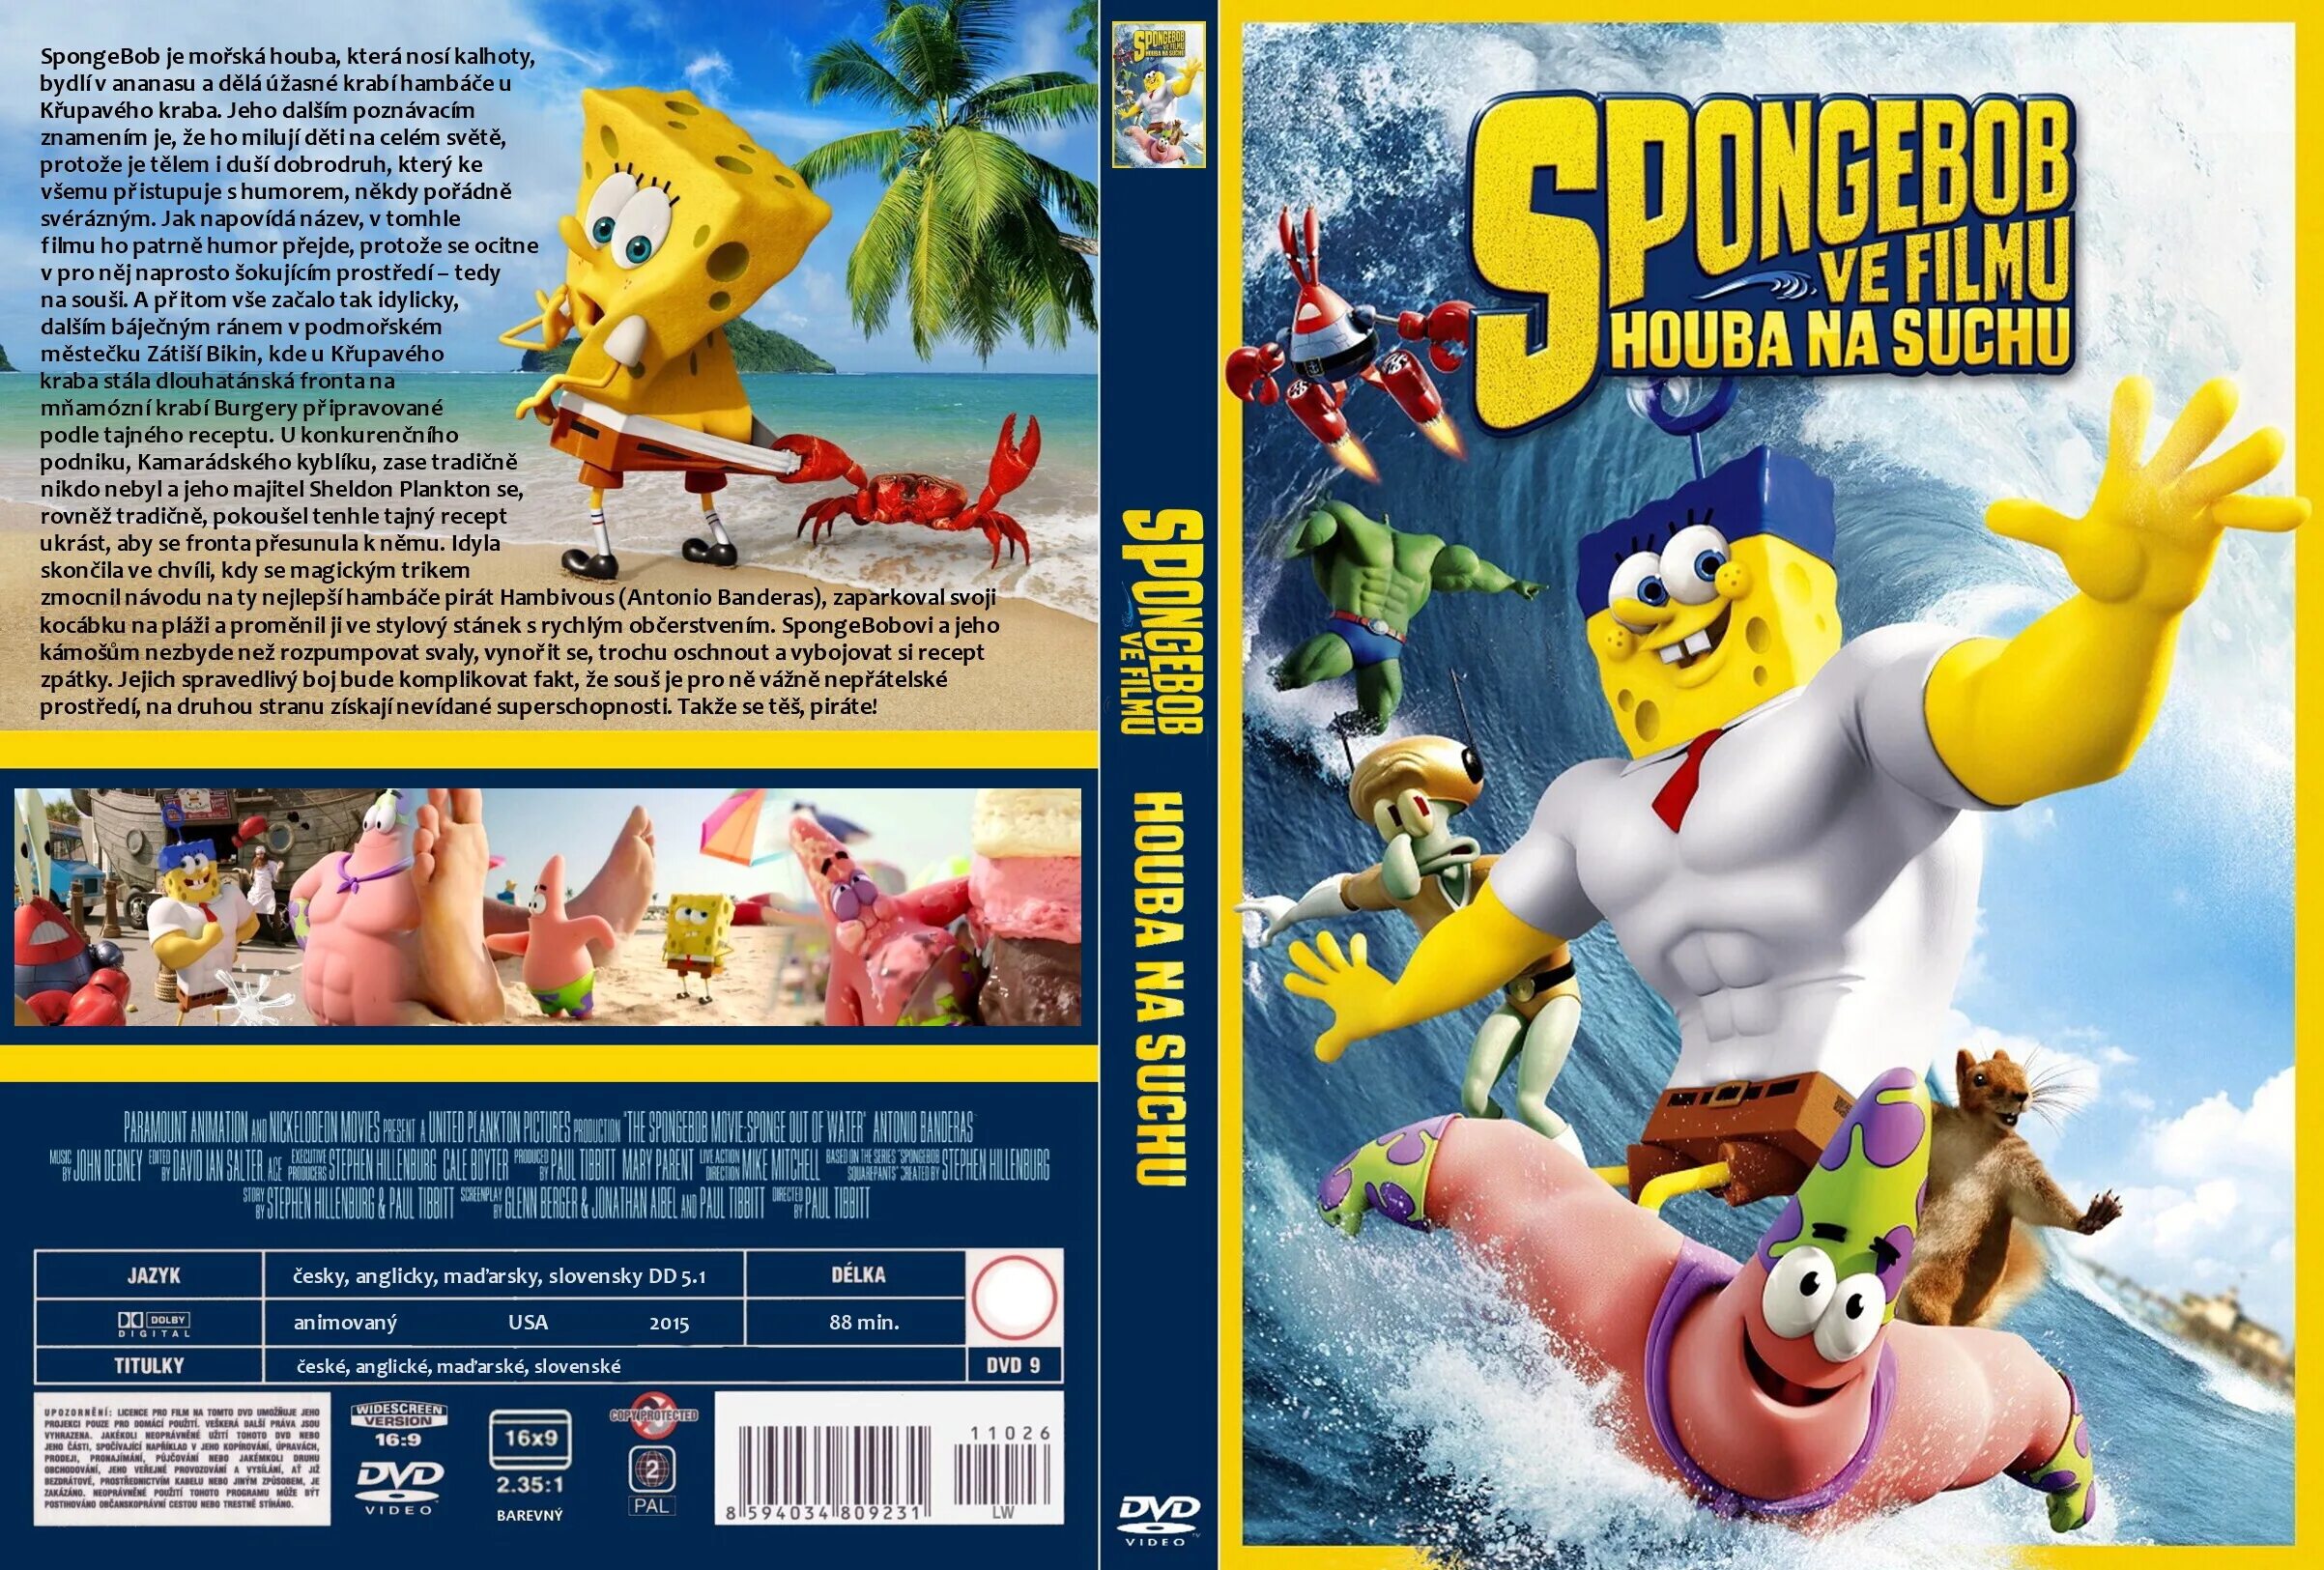 The Spongebob movie Sponge out of Water. Spongebob movie the Sponge out of Water Extended Preview. Spongebob movie Cover. The Spongebob movie: Sponge out of Water/credits.